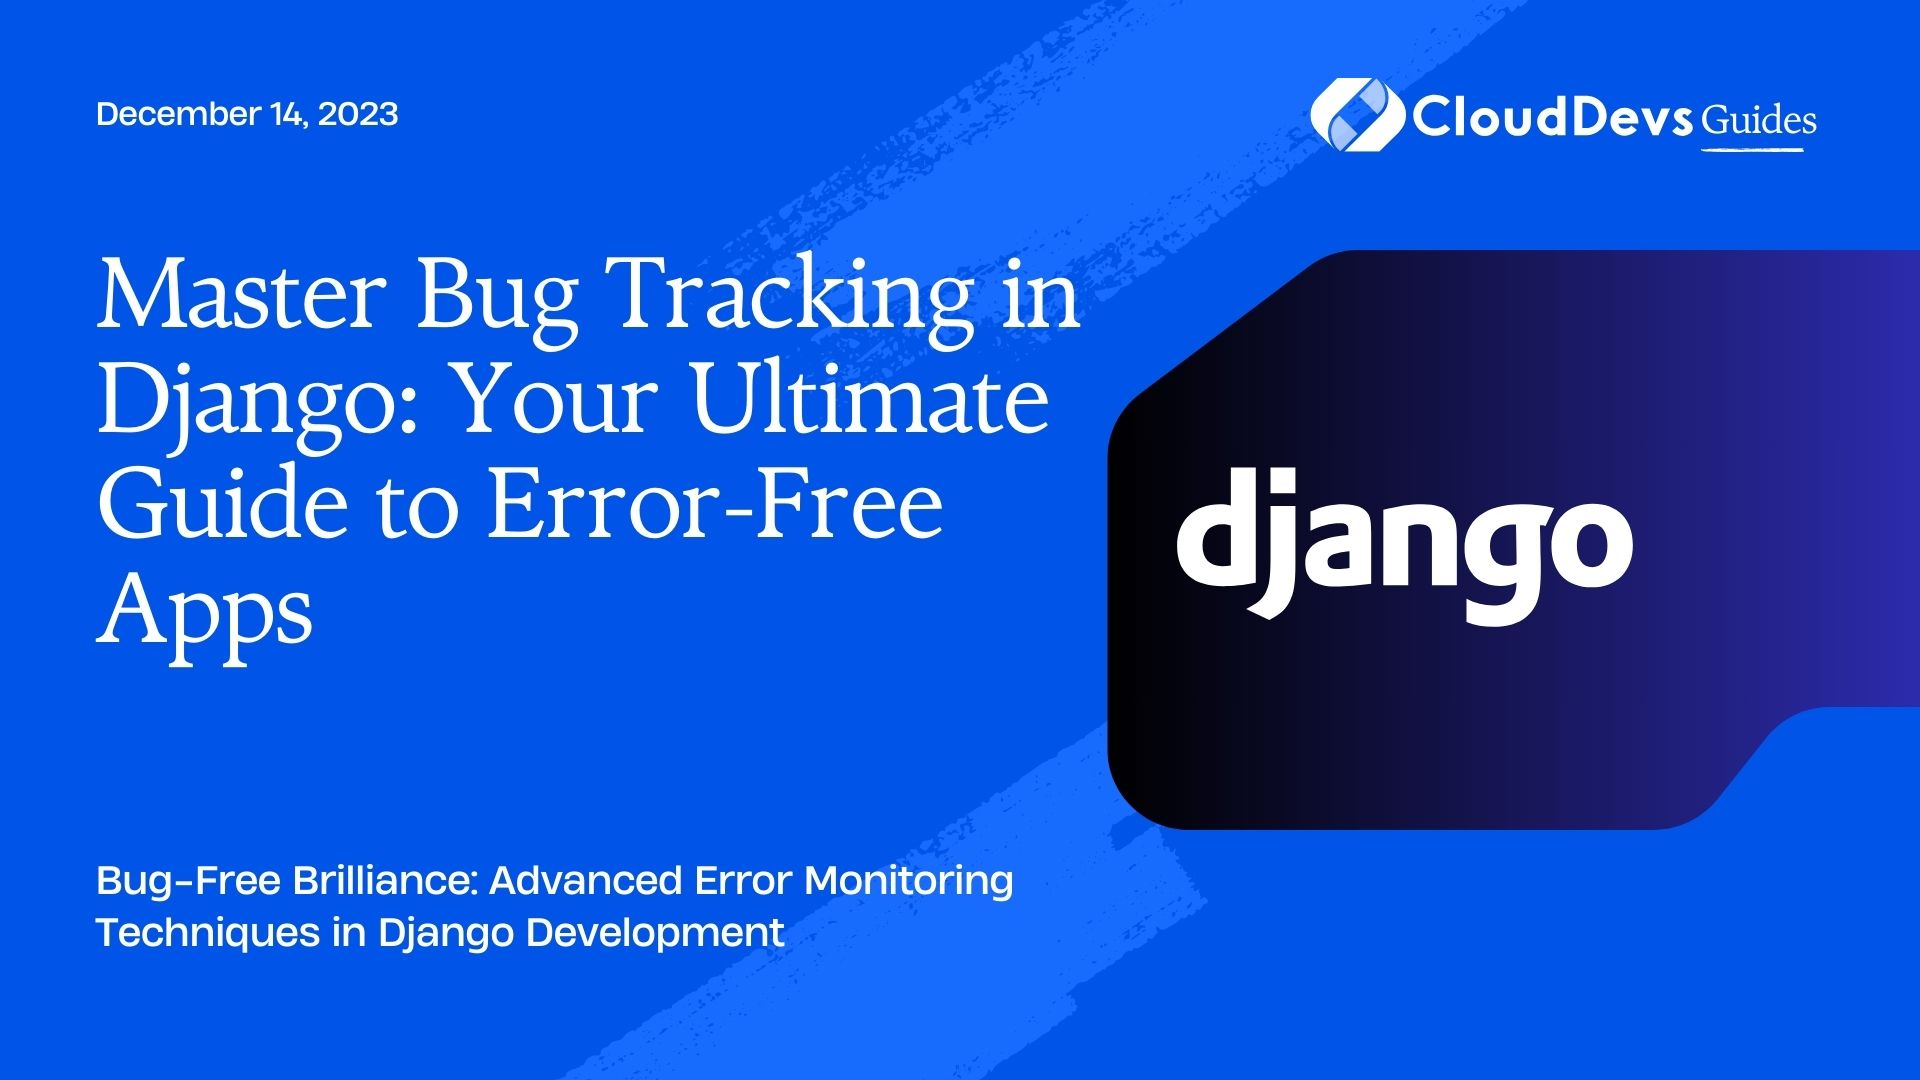 Master Bug Tracking in Django: Your Ultimate Guide to Error-Free Apps